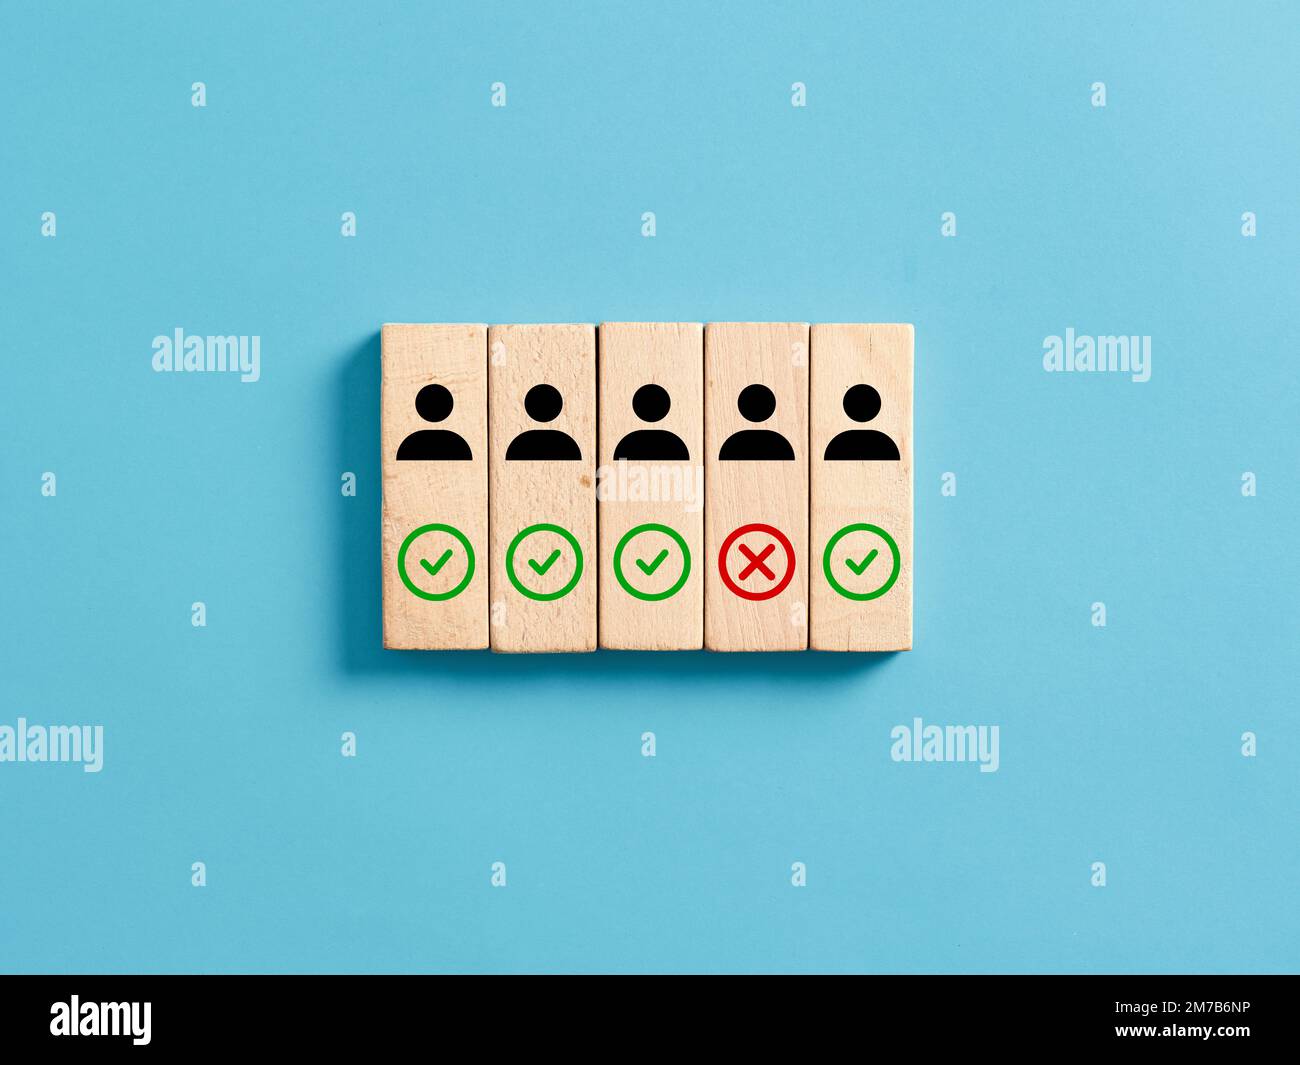 Firing and employee. Termination of job contract. Job dismissal or discharge. Candidate rejection. Employee, checkmark and cross icons on wooden block Stock Photo